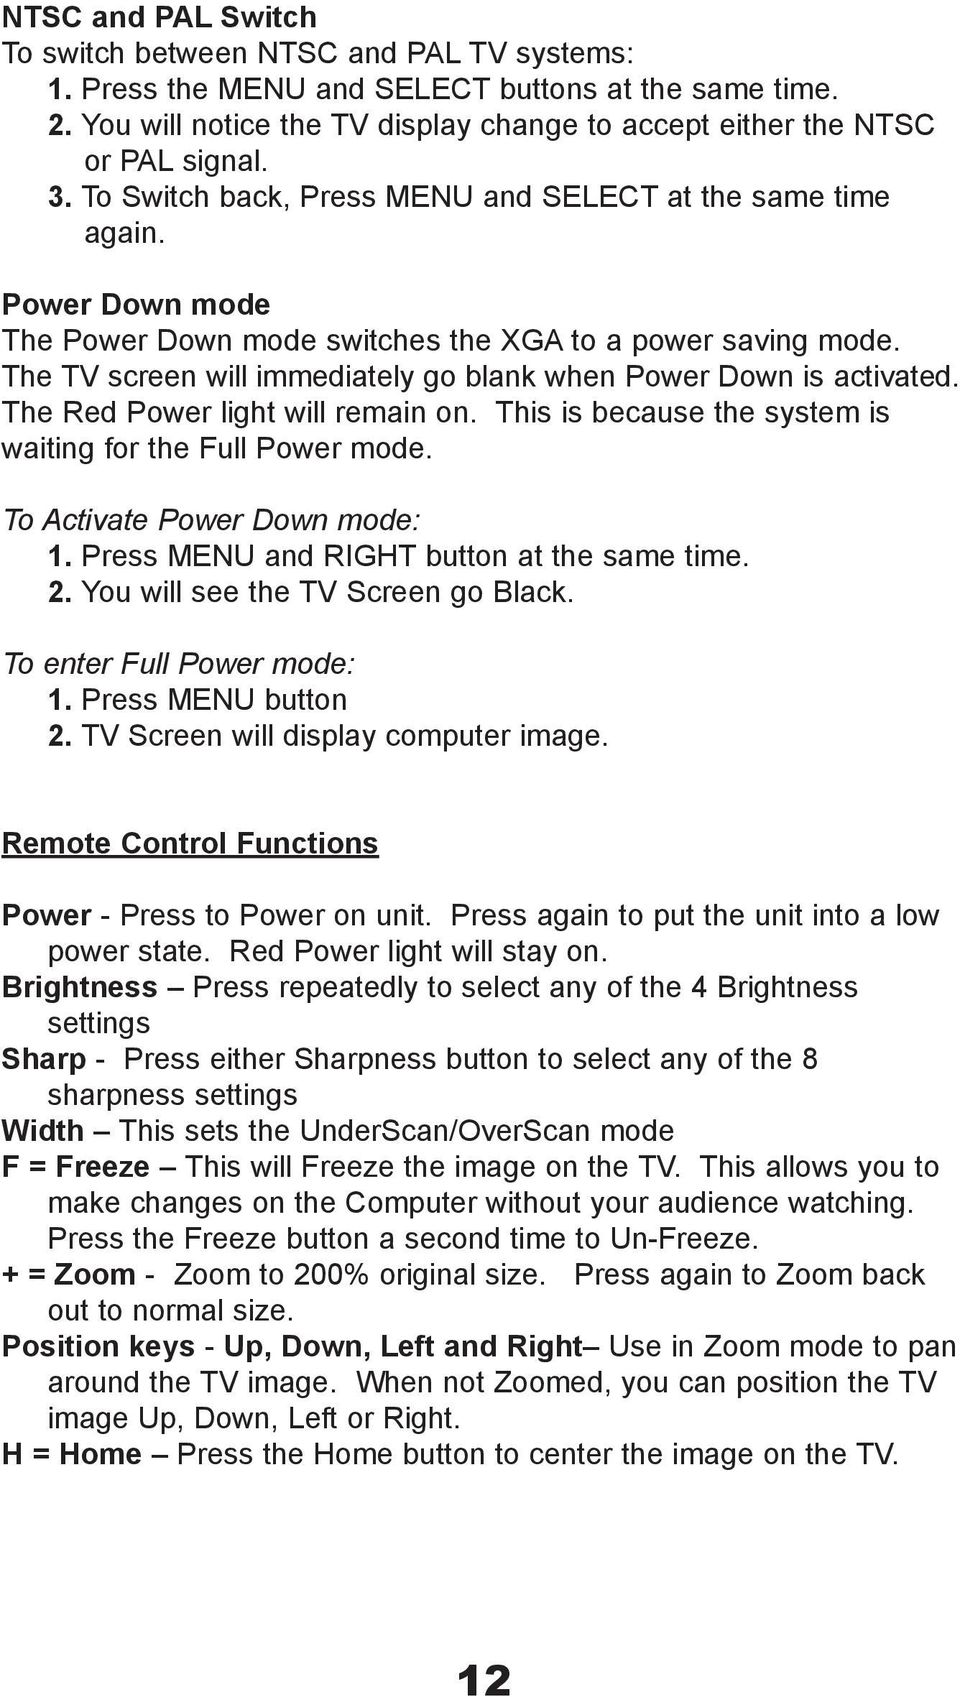 The TV screen will immediately go blank when Power Down is activated. The Red Power light will remain on. This is because the system is waiting for the Full Power mode. To Activate Power Down mode: 1.